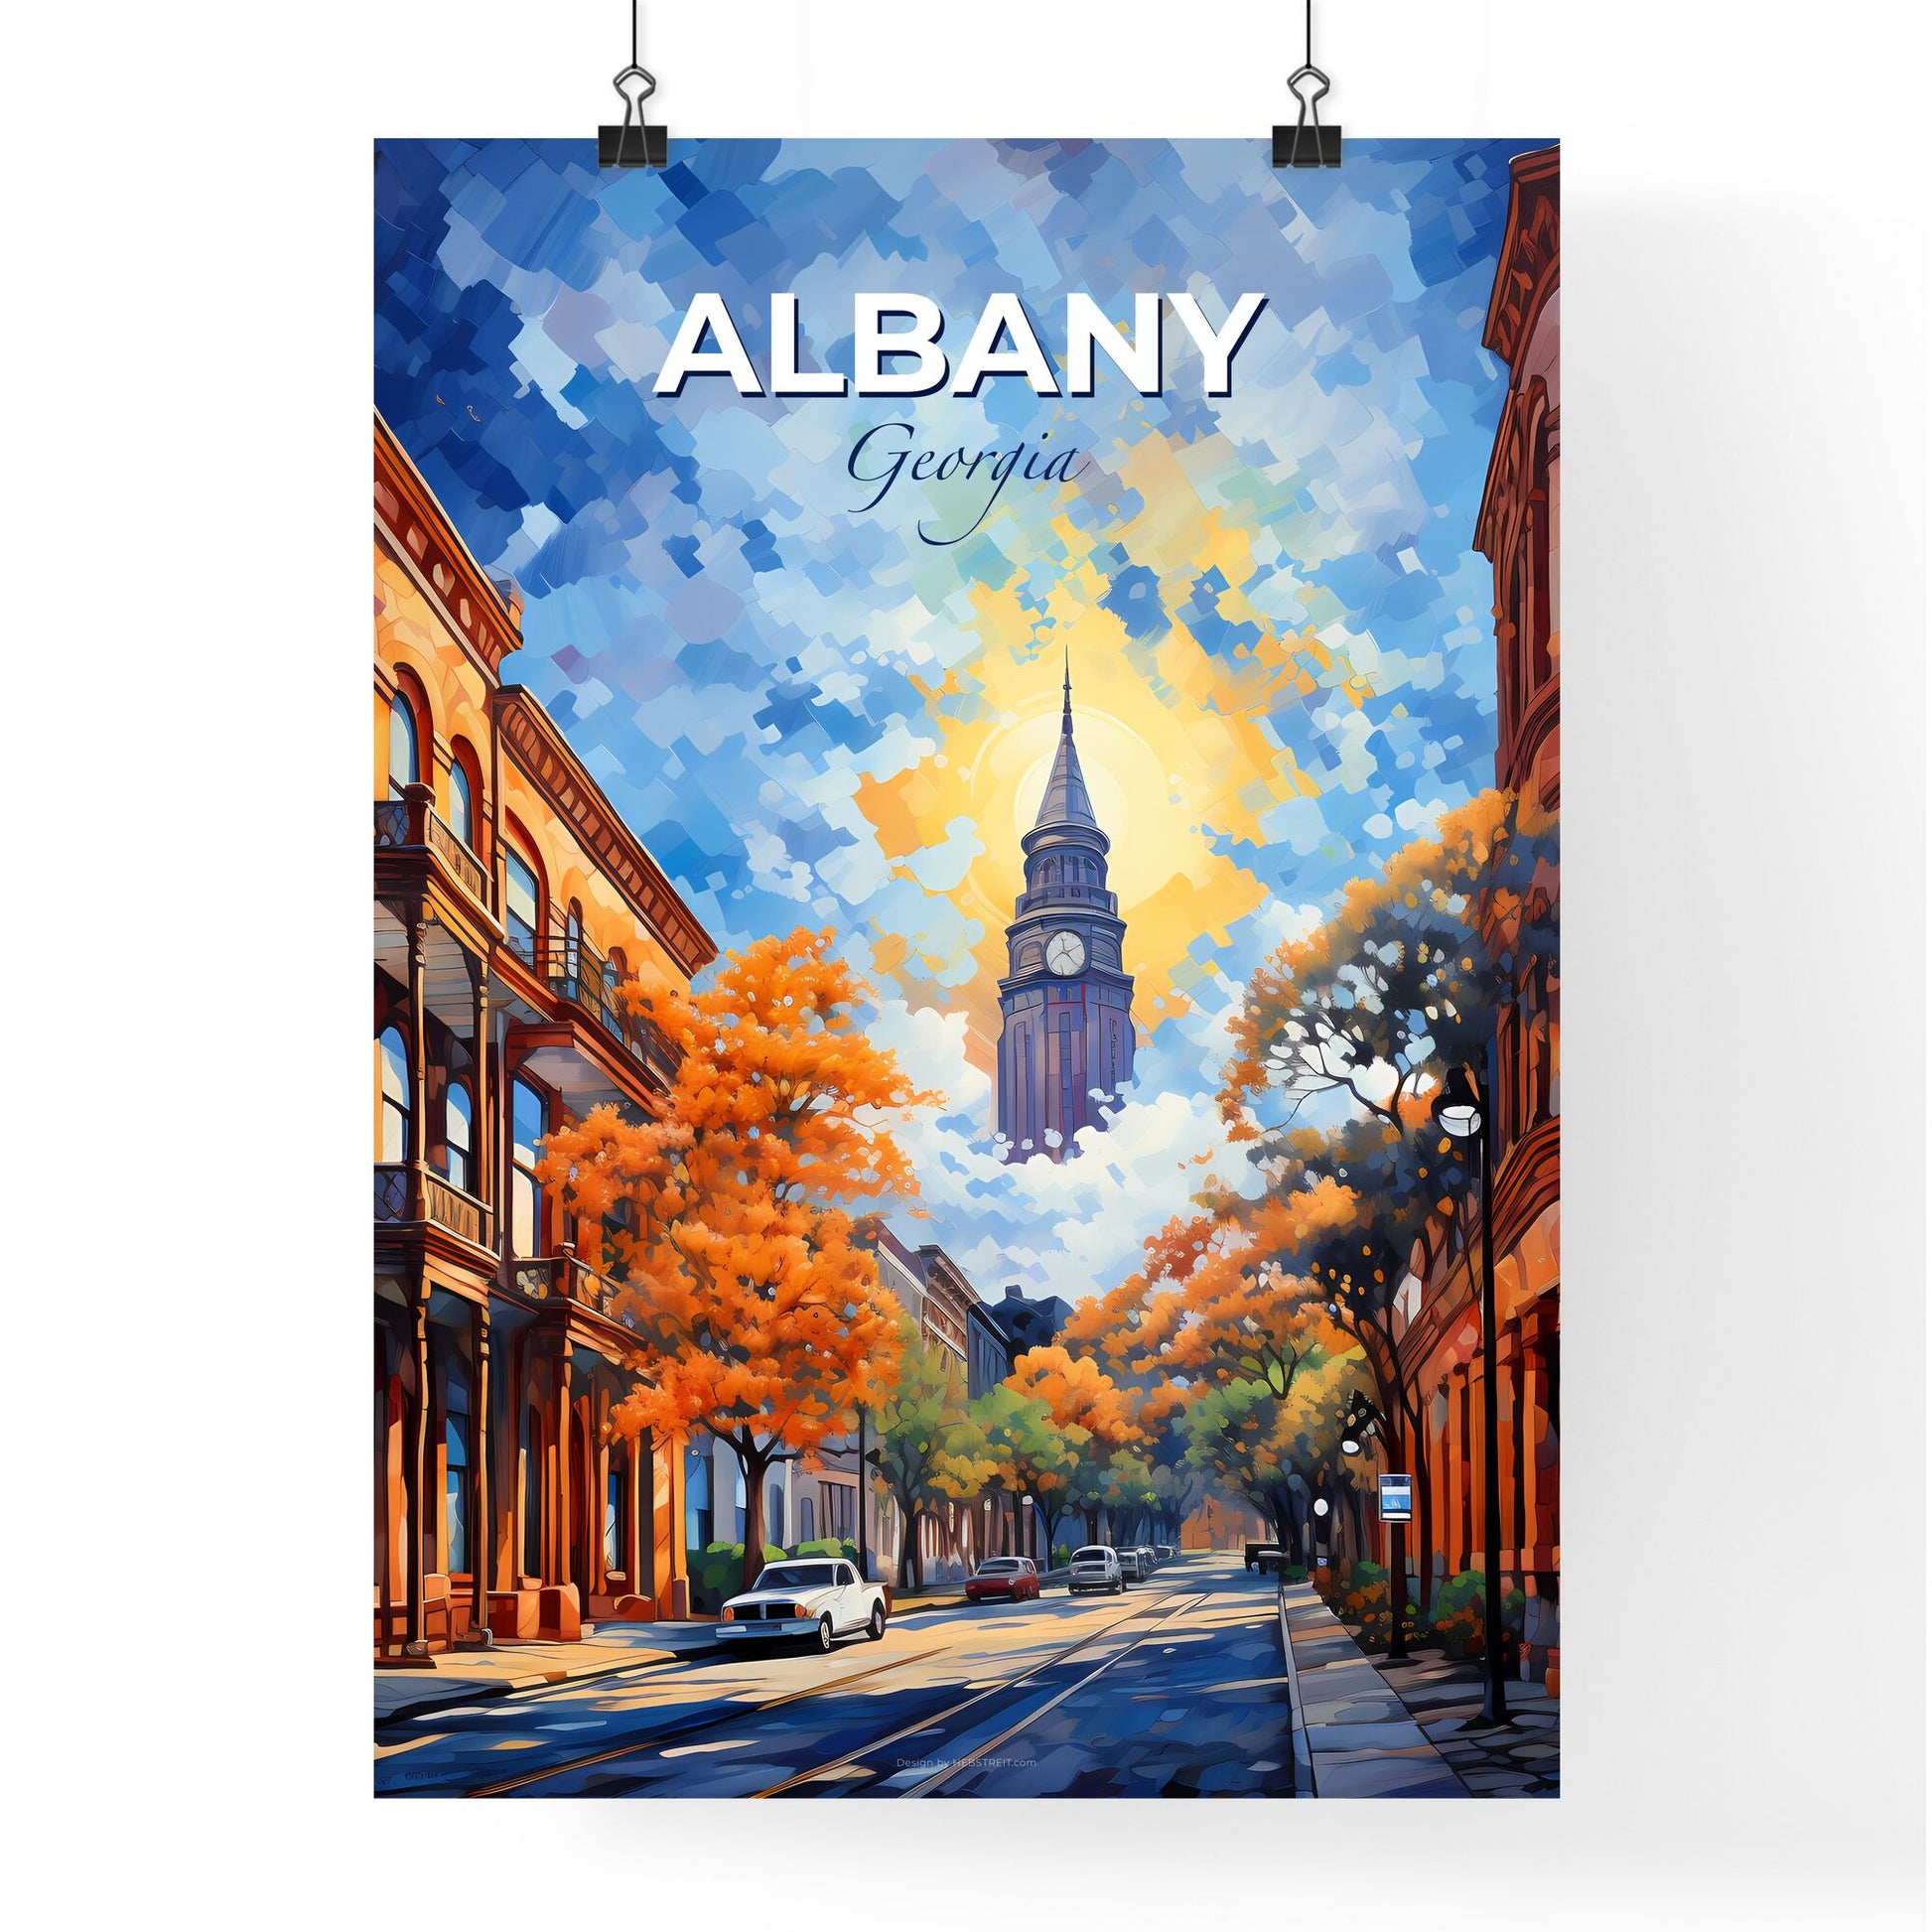 Albany, Georgia, A Poster of a street with trees and a clock tower Default Title